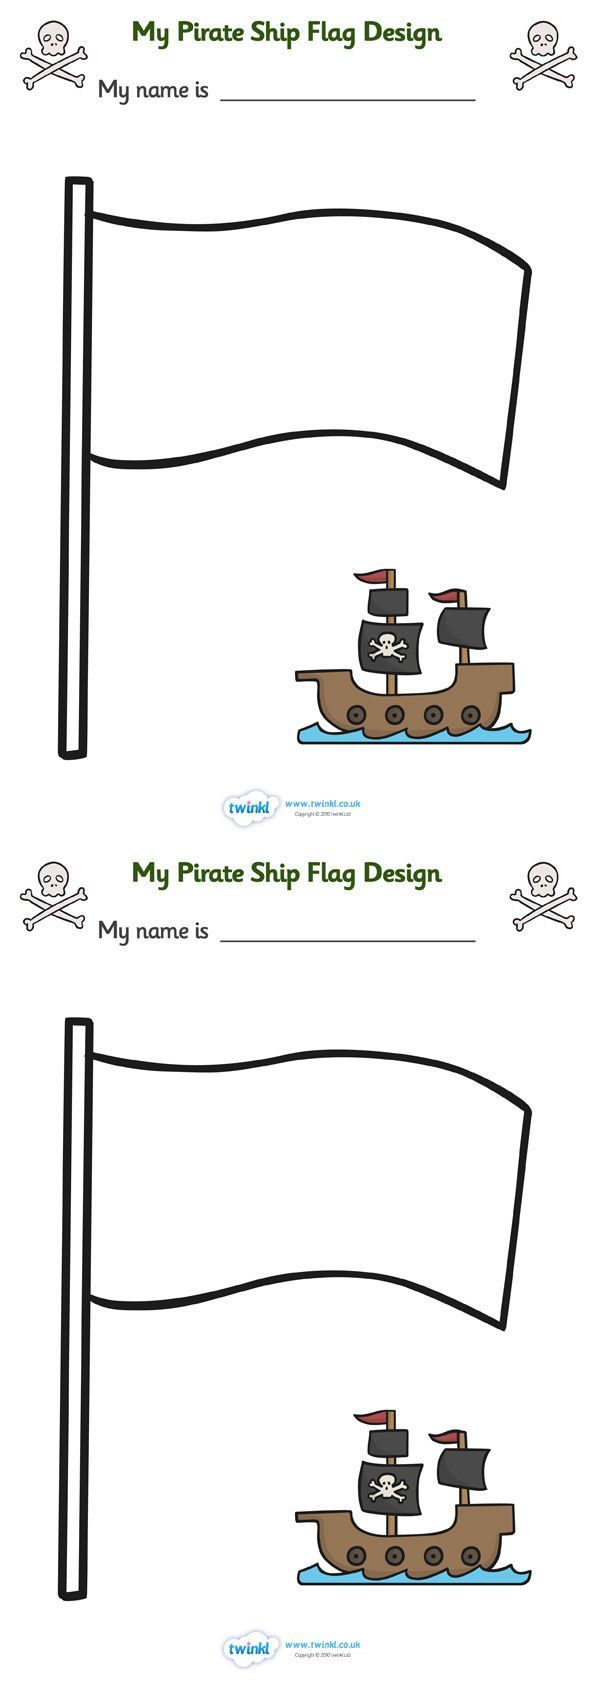 Twinkl Resources  Design Your Own Ship Flag Worksheet  Classroom printables for Pre-School, Kindergarten, Primary School and